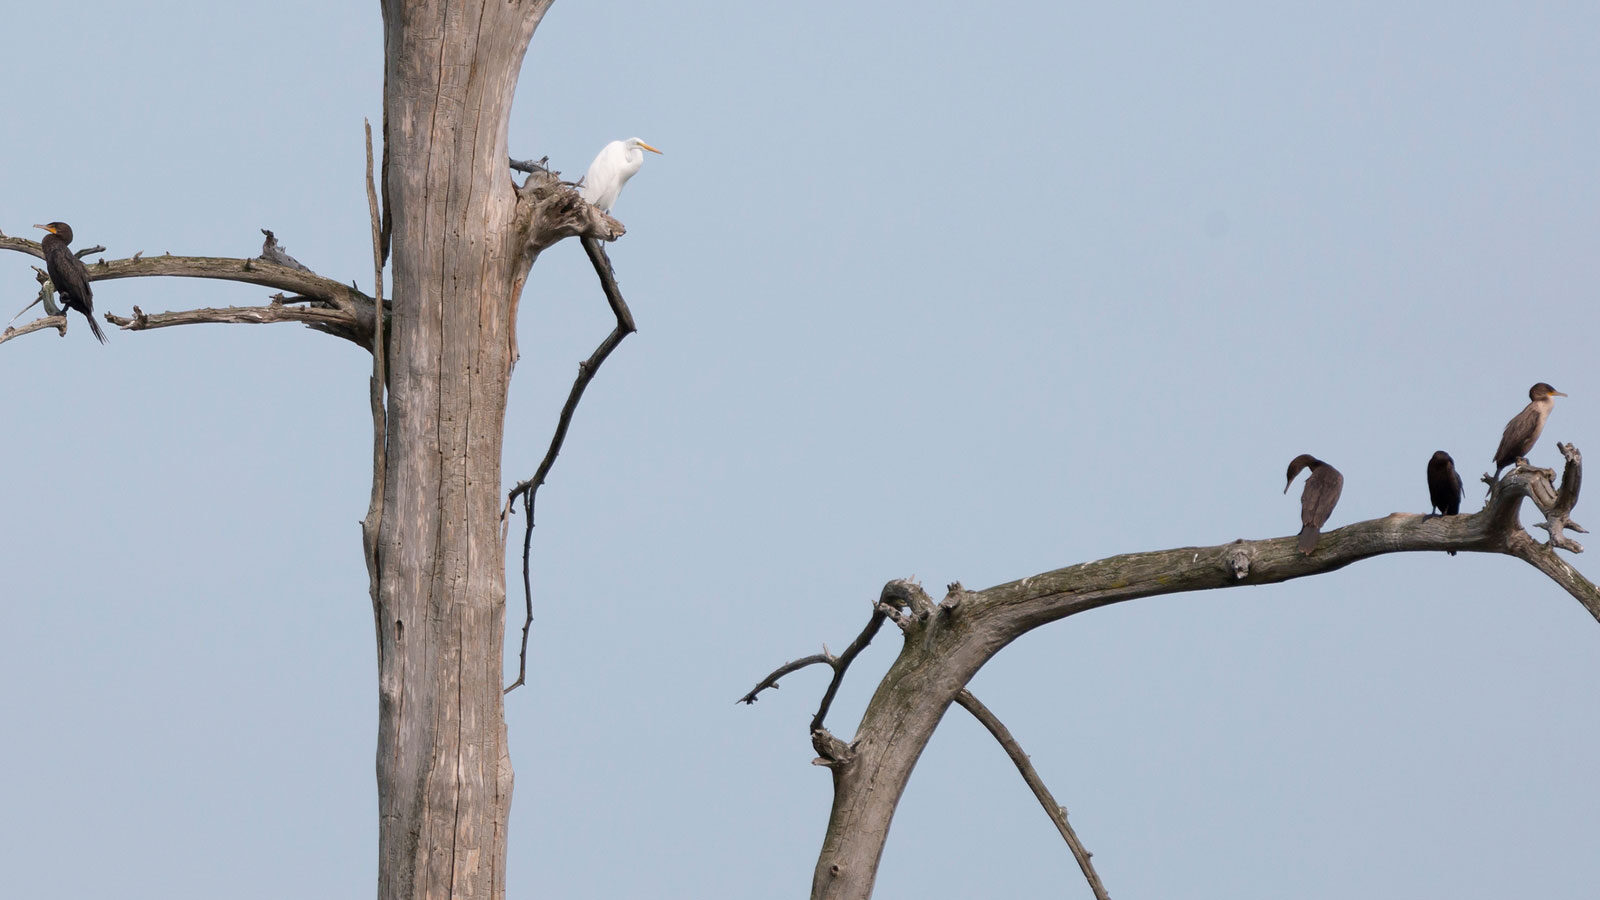 Great egret and double-crested cormorants in a bare tree